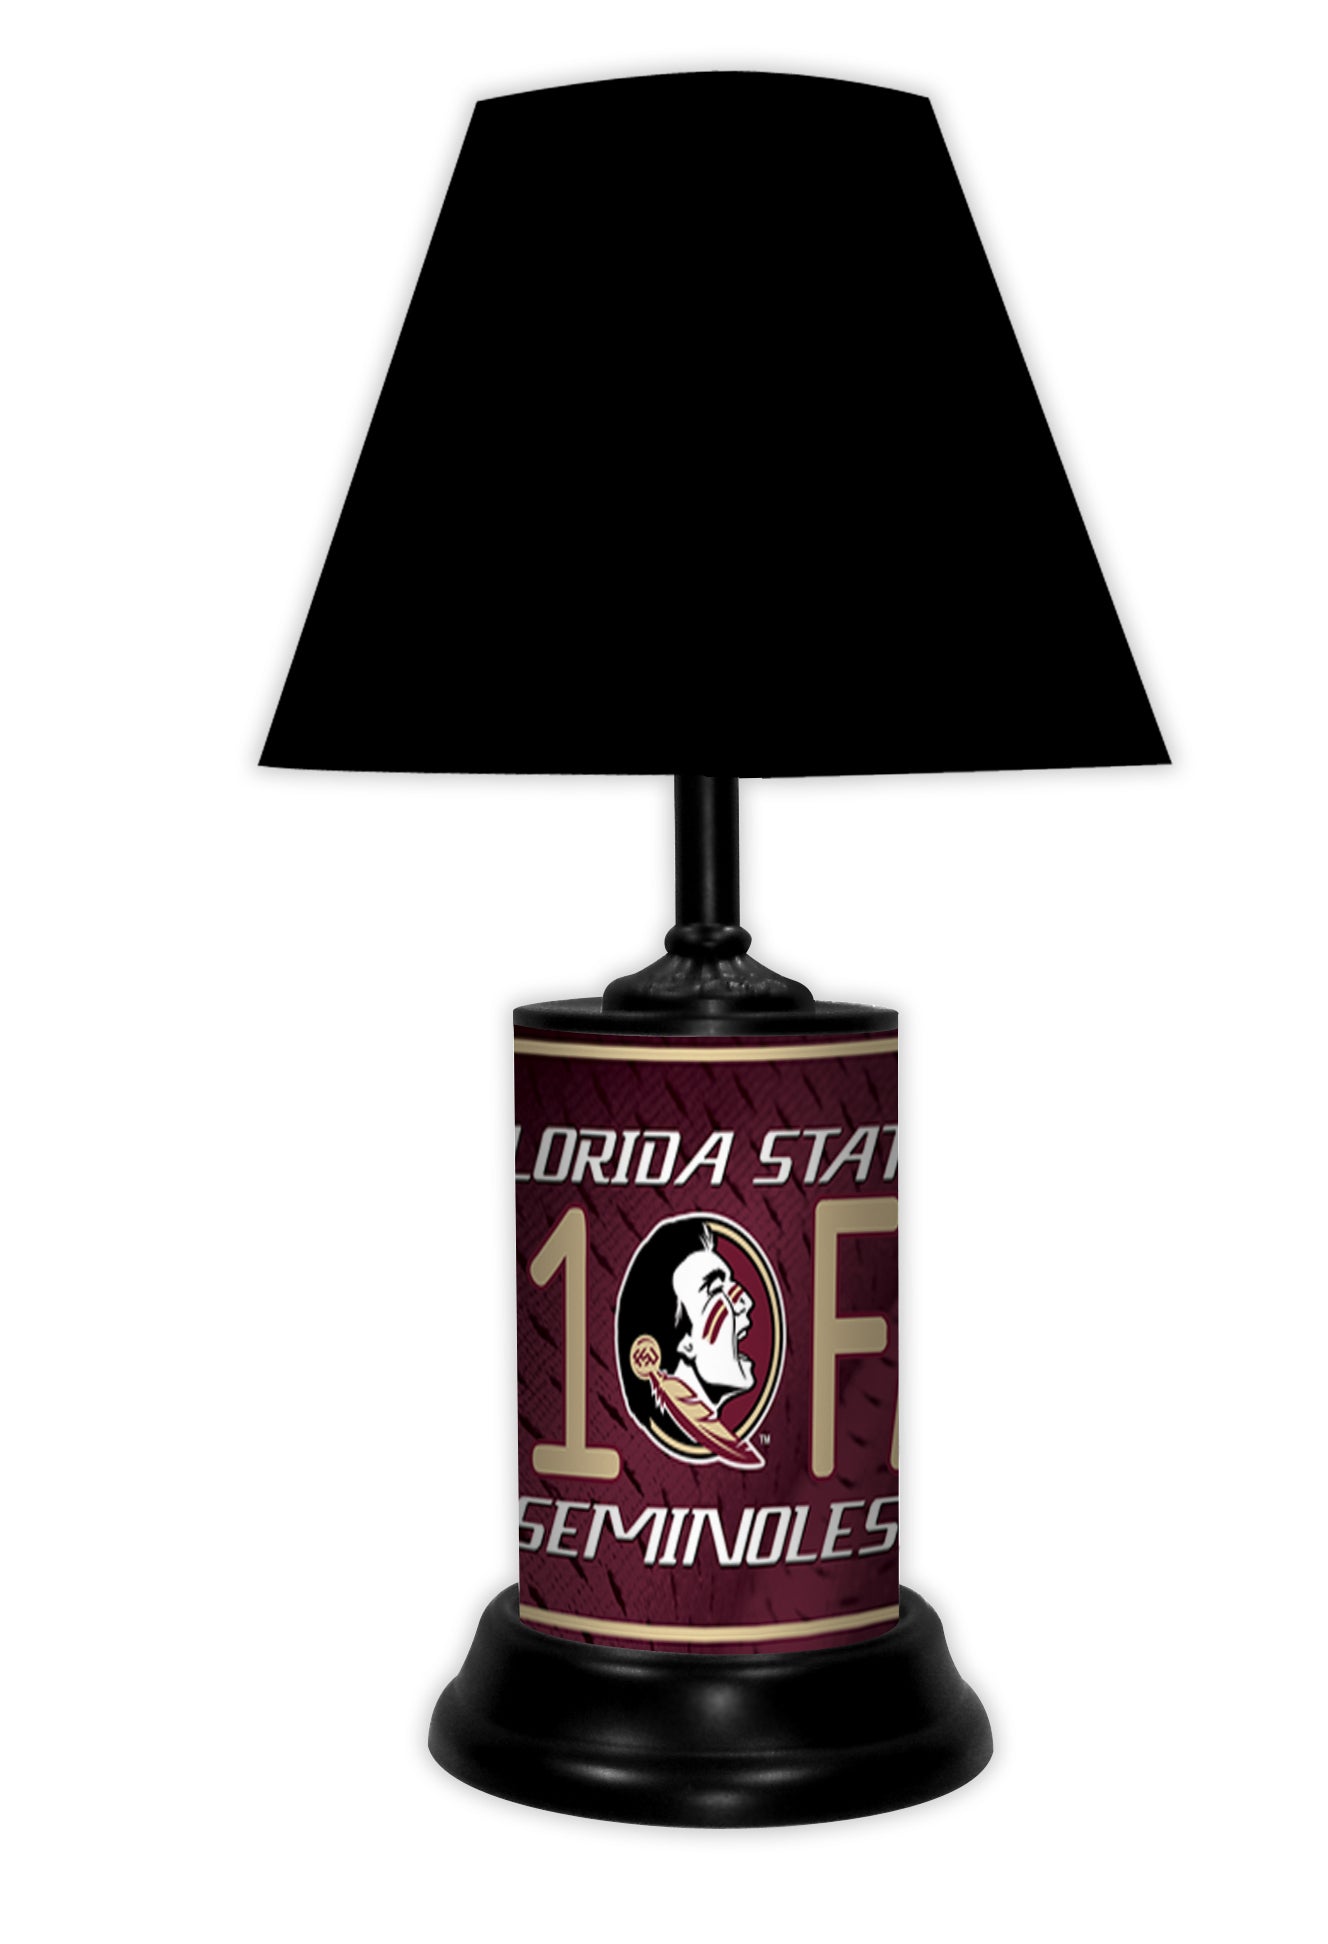 Florida Seminoles tabletop lamp featuring team colors, logo and wording "#1 Fan" with black base and black shade